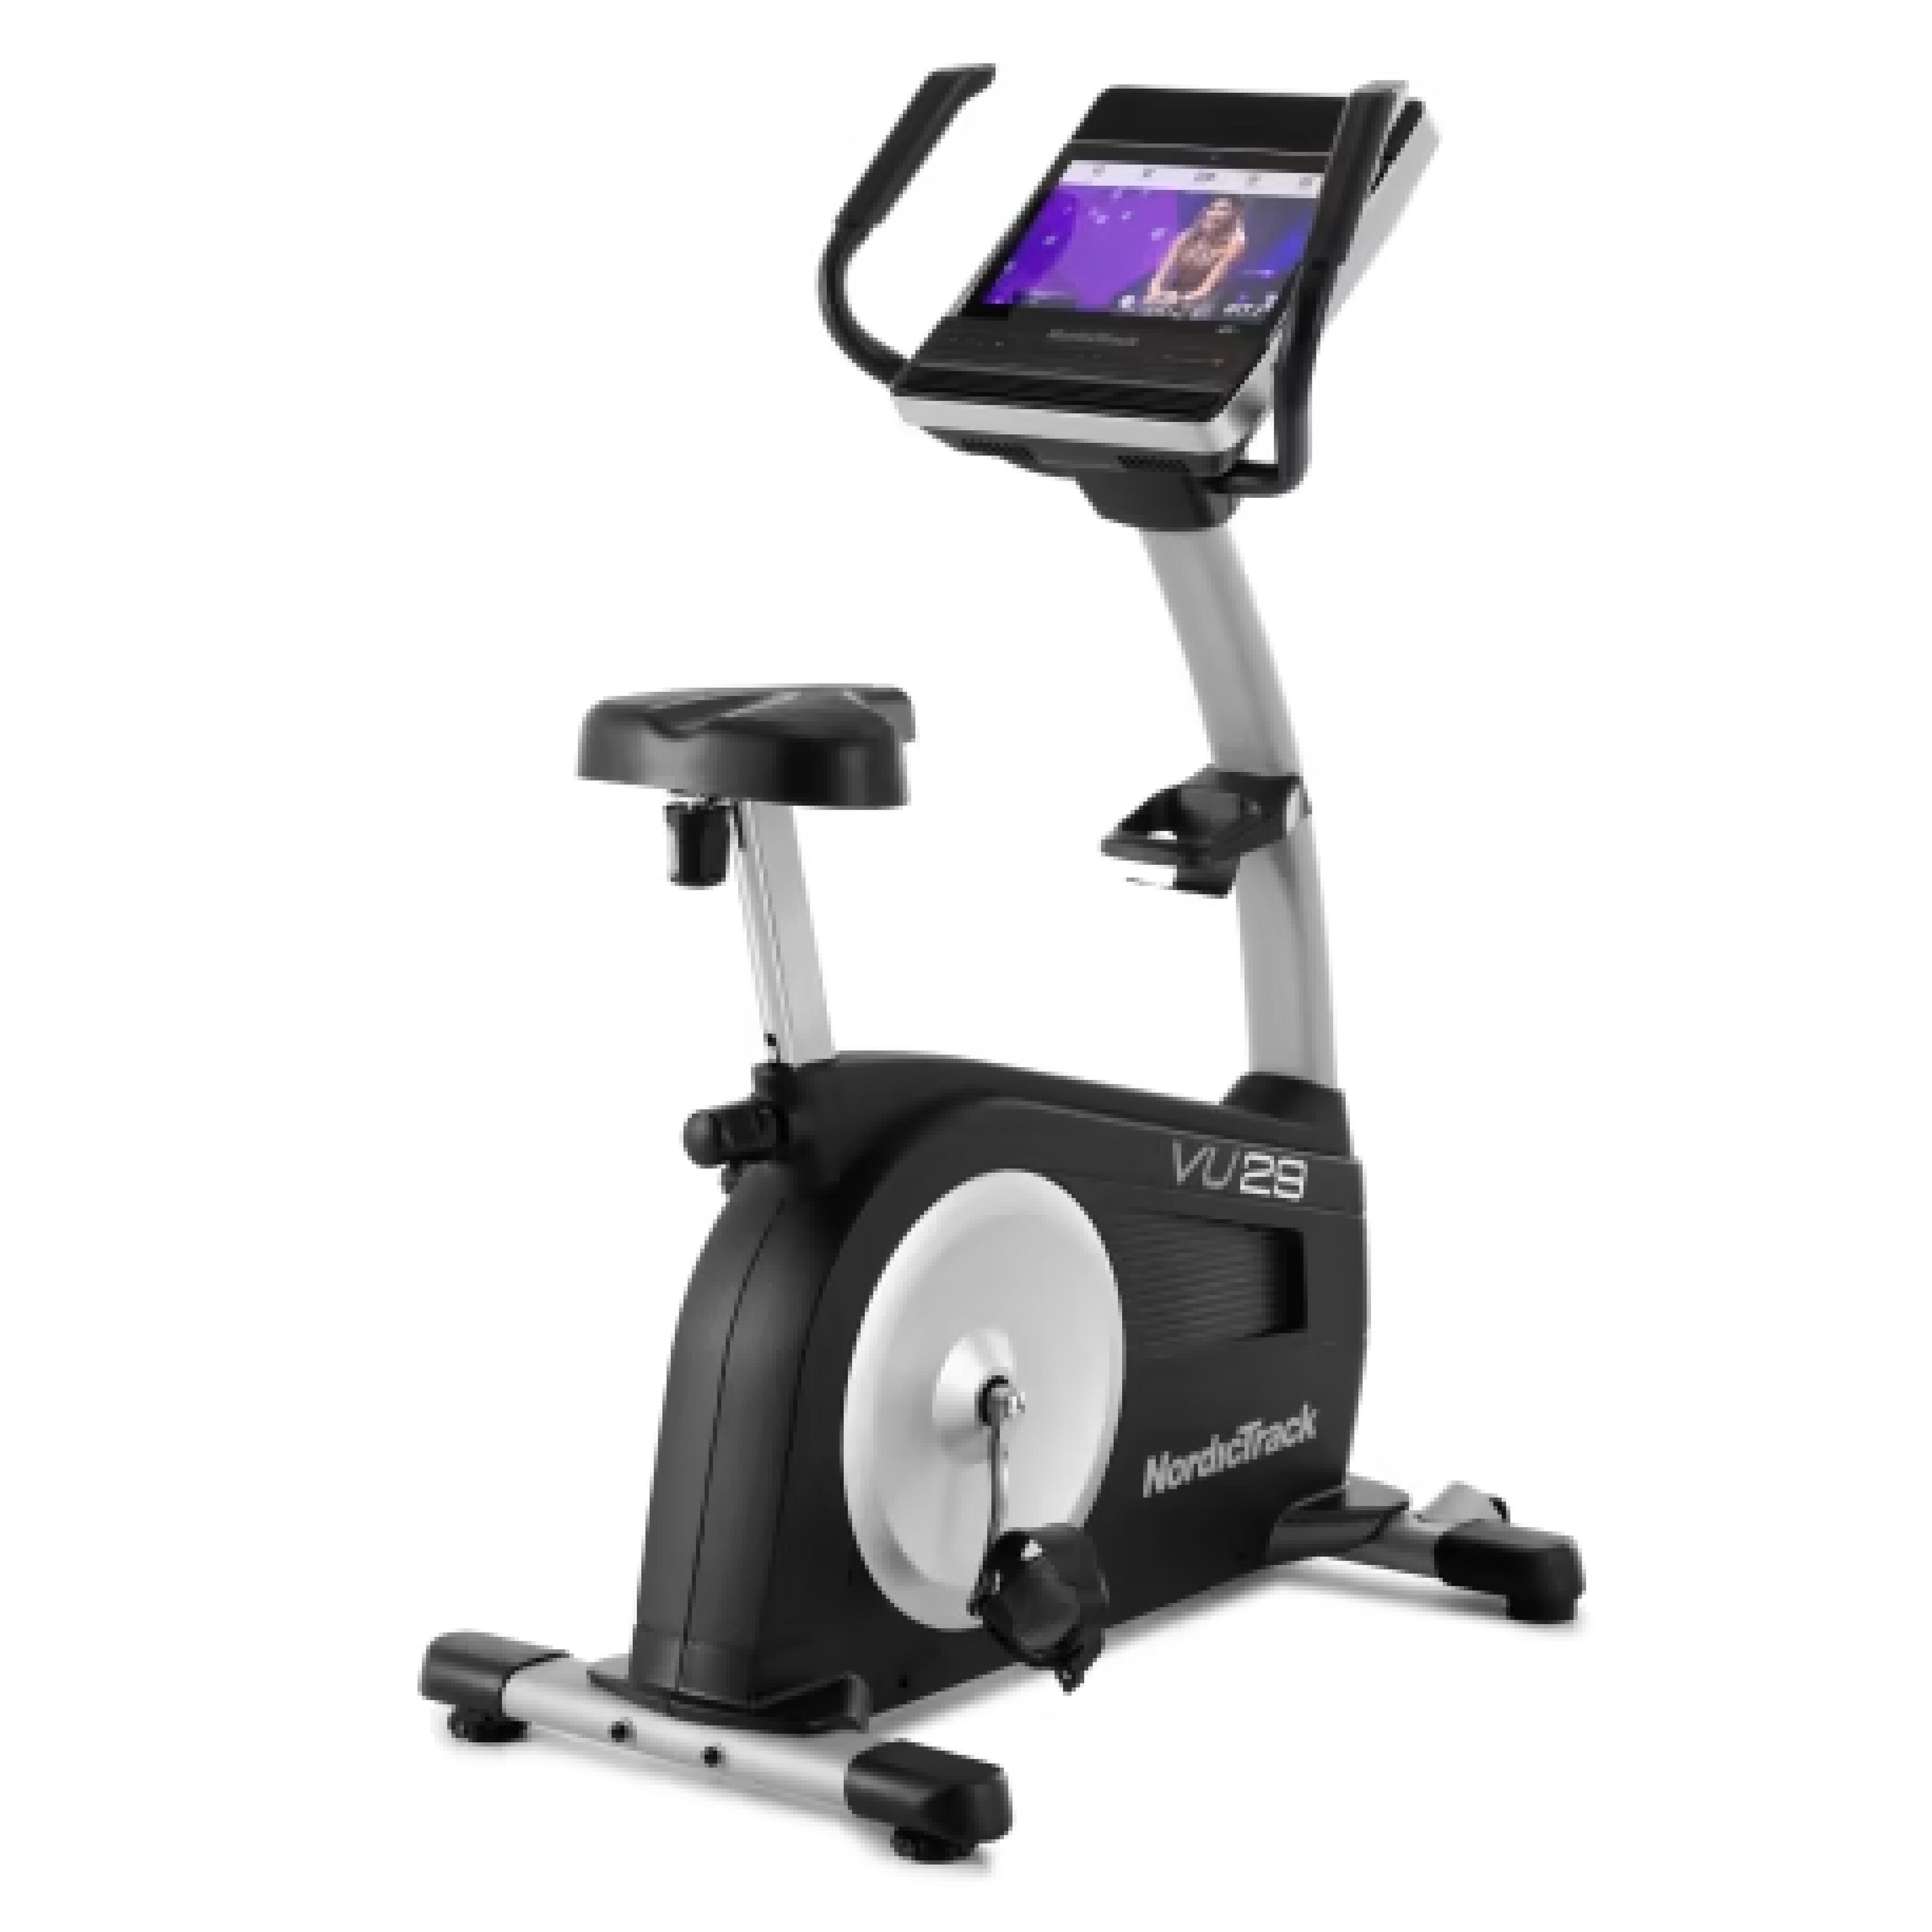 NORDICTRACK Interactive Exercise Bike with 30-Day iFIT Subscription VU29